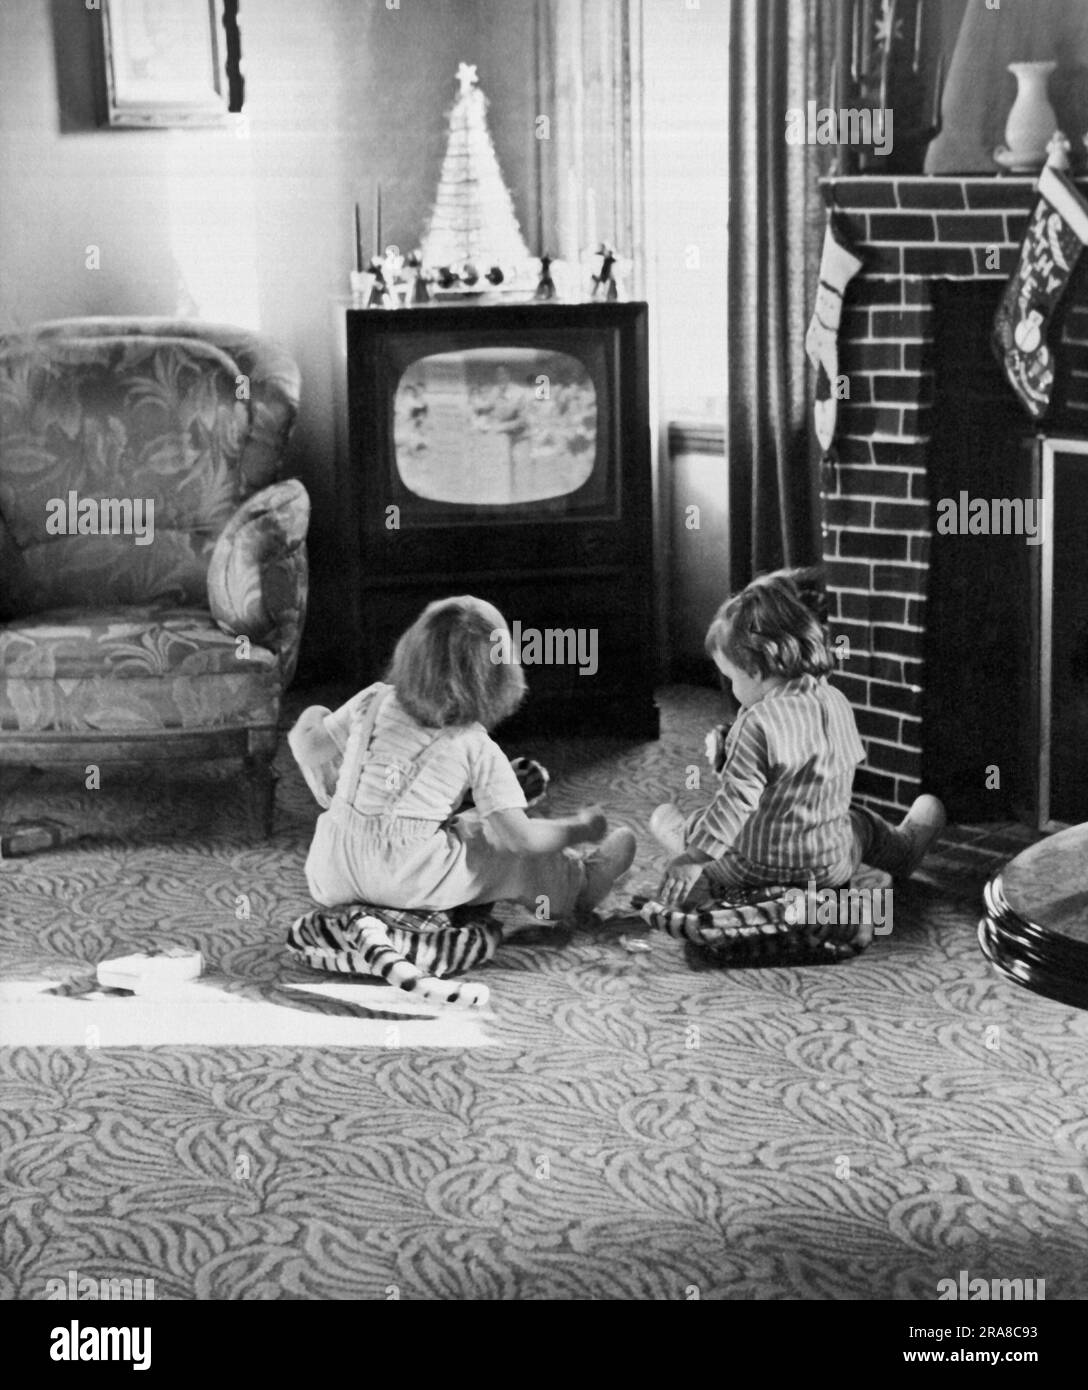 United States:  c. 1955, Two small children sitting on the living room floor watching television. Stock Photo